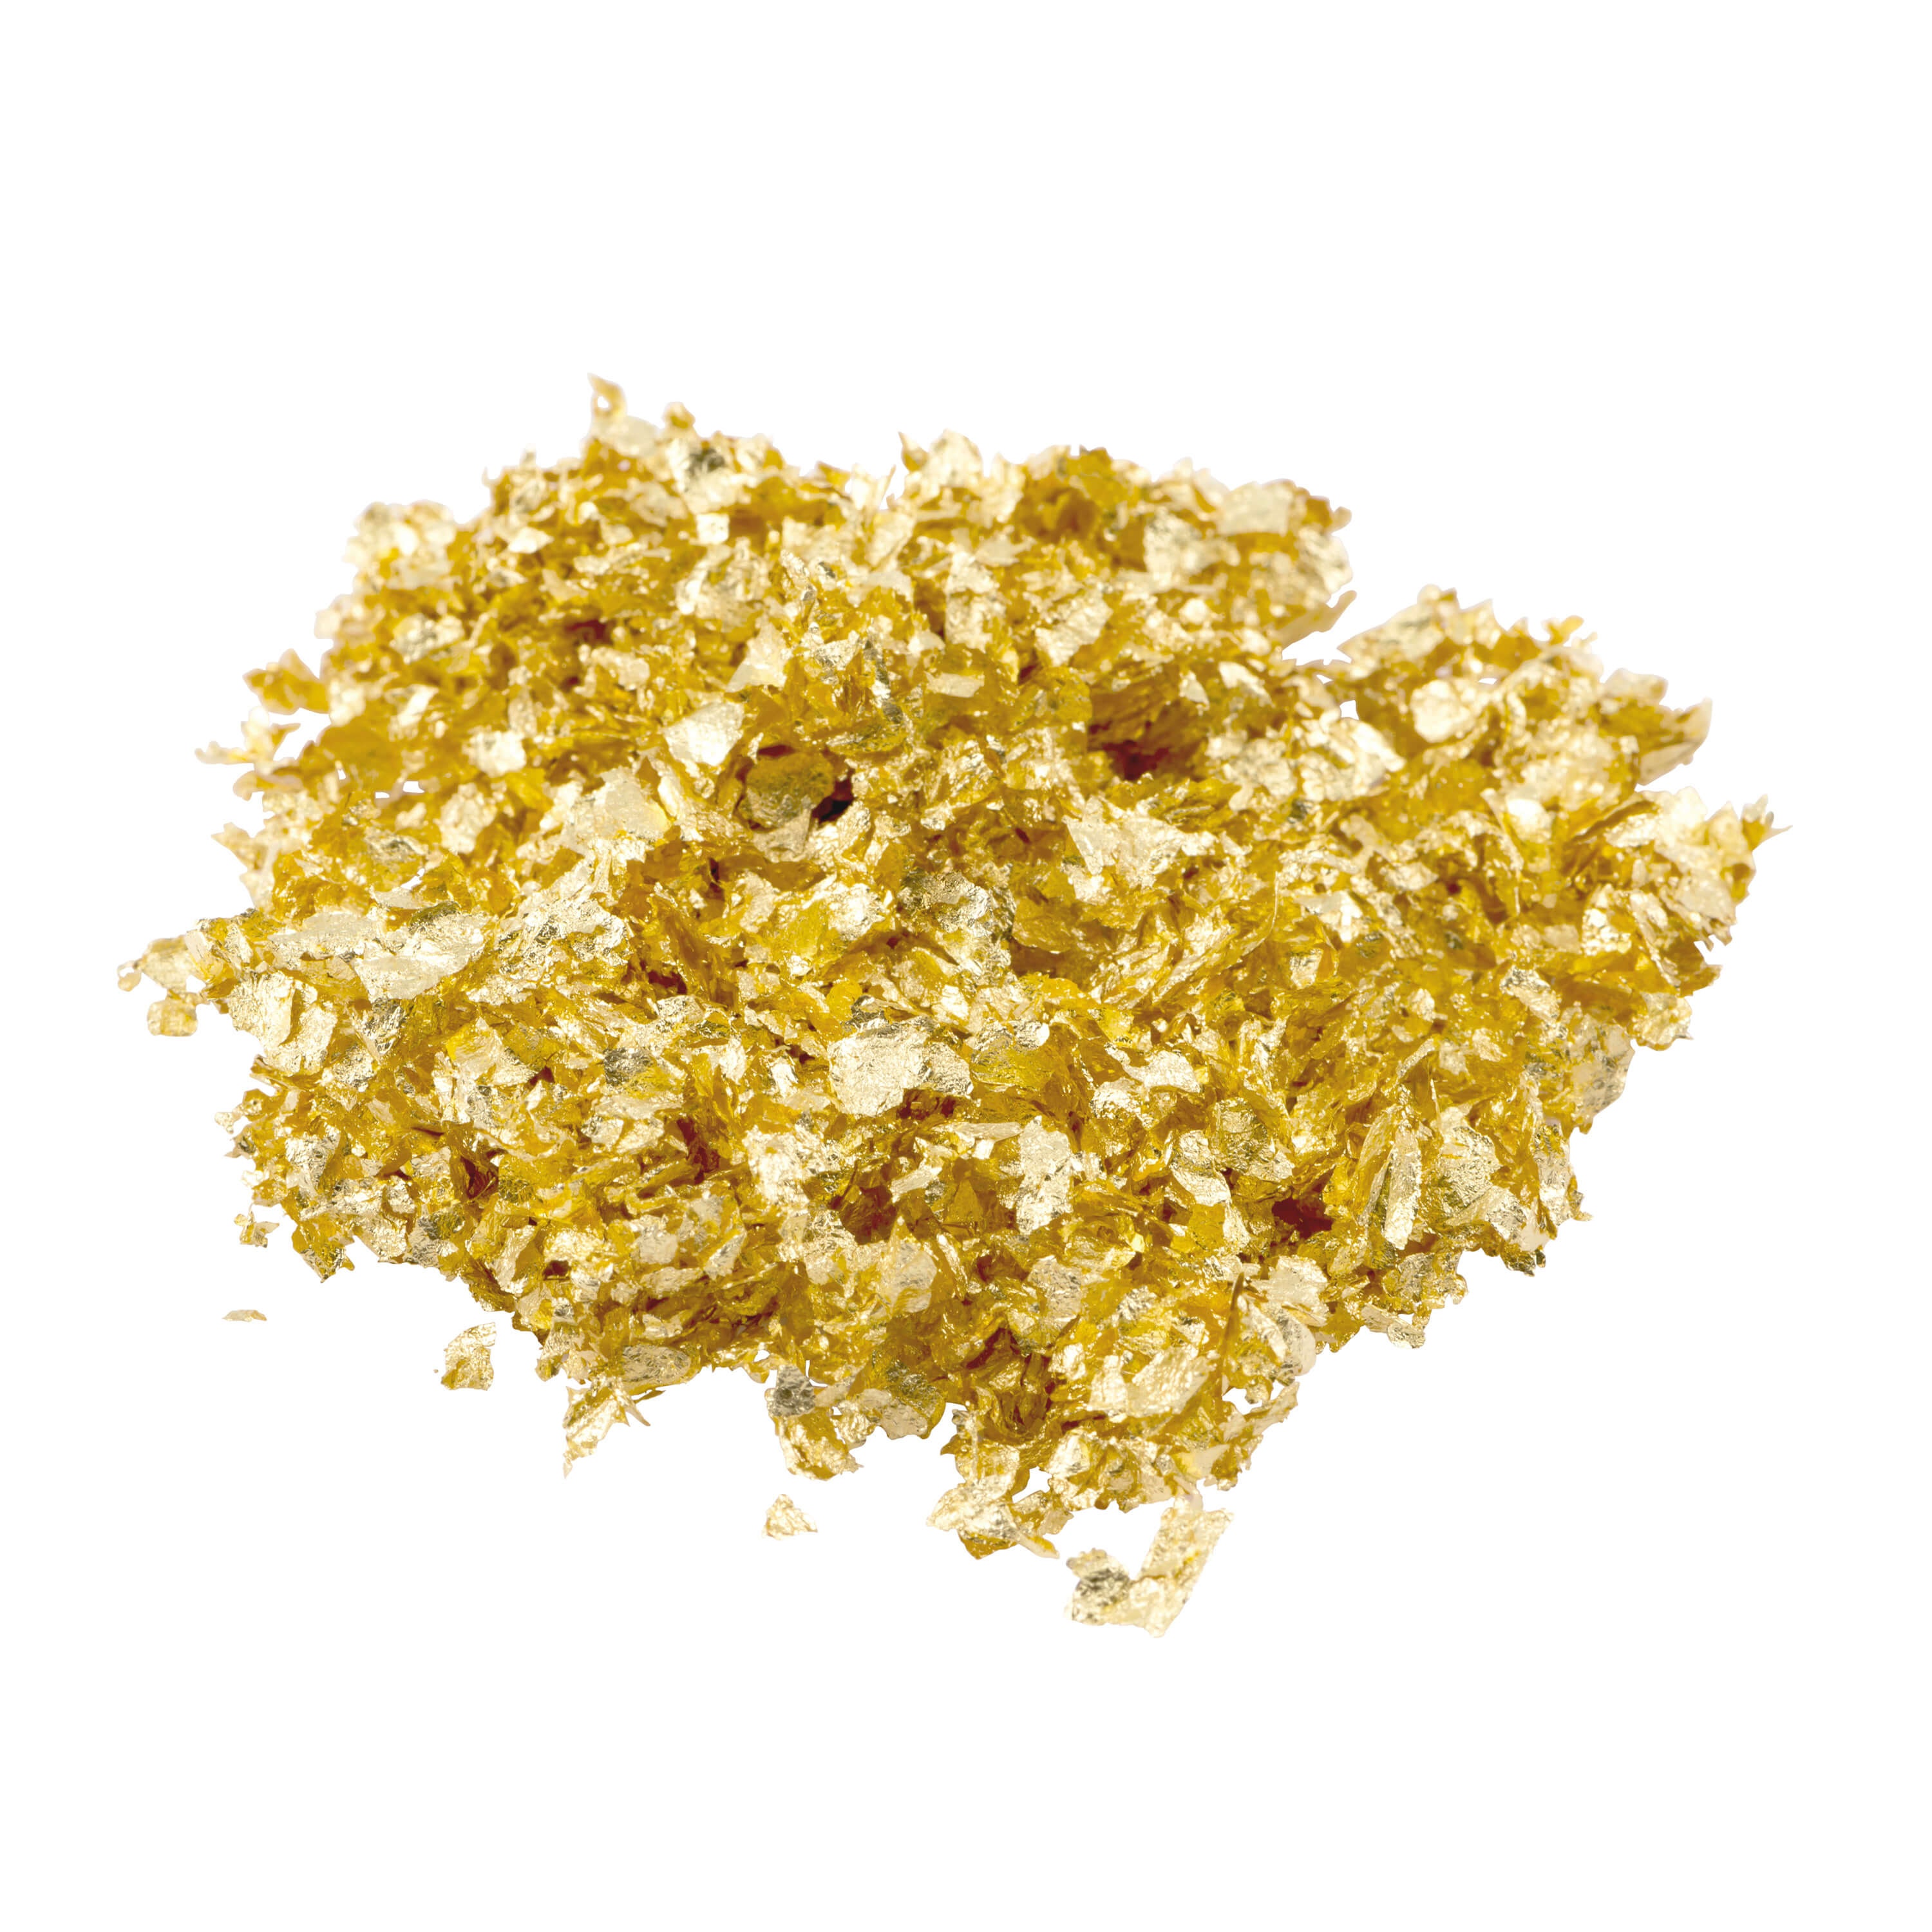 Edible Gold Leaf For Bakery - Manufacturer Exporter Supplier from Ghaziabad  India